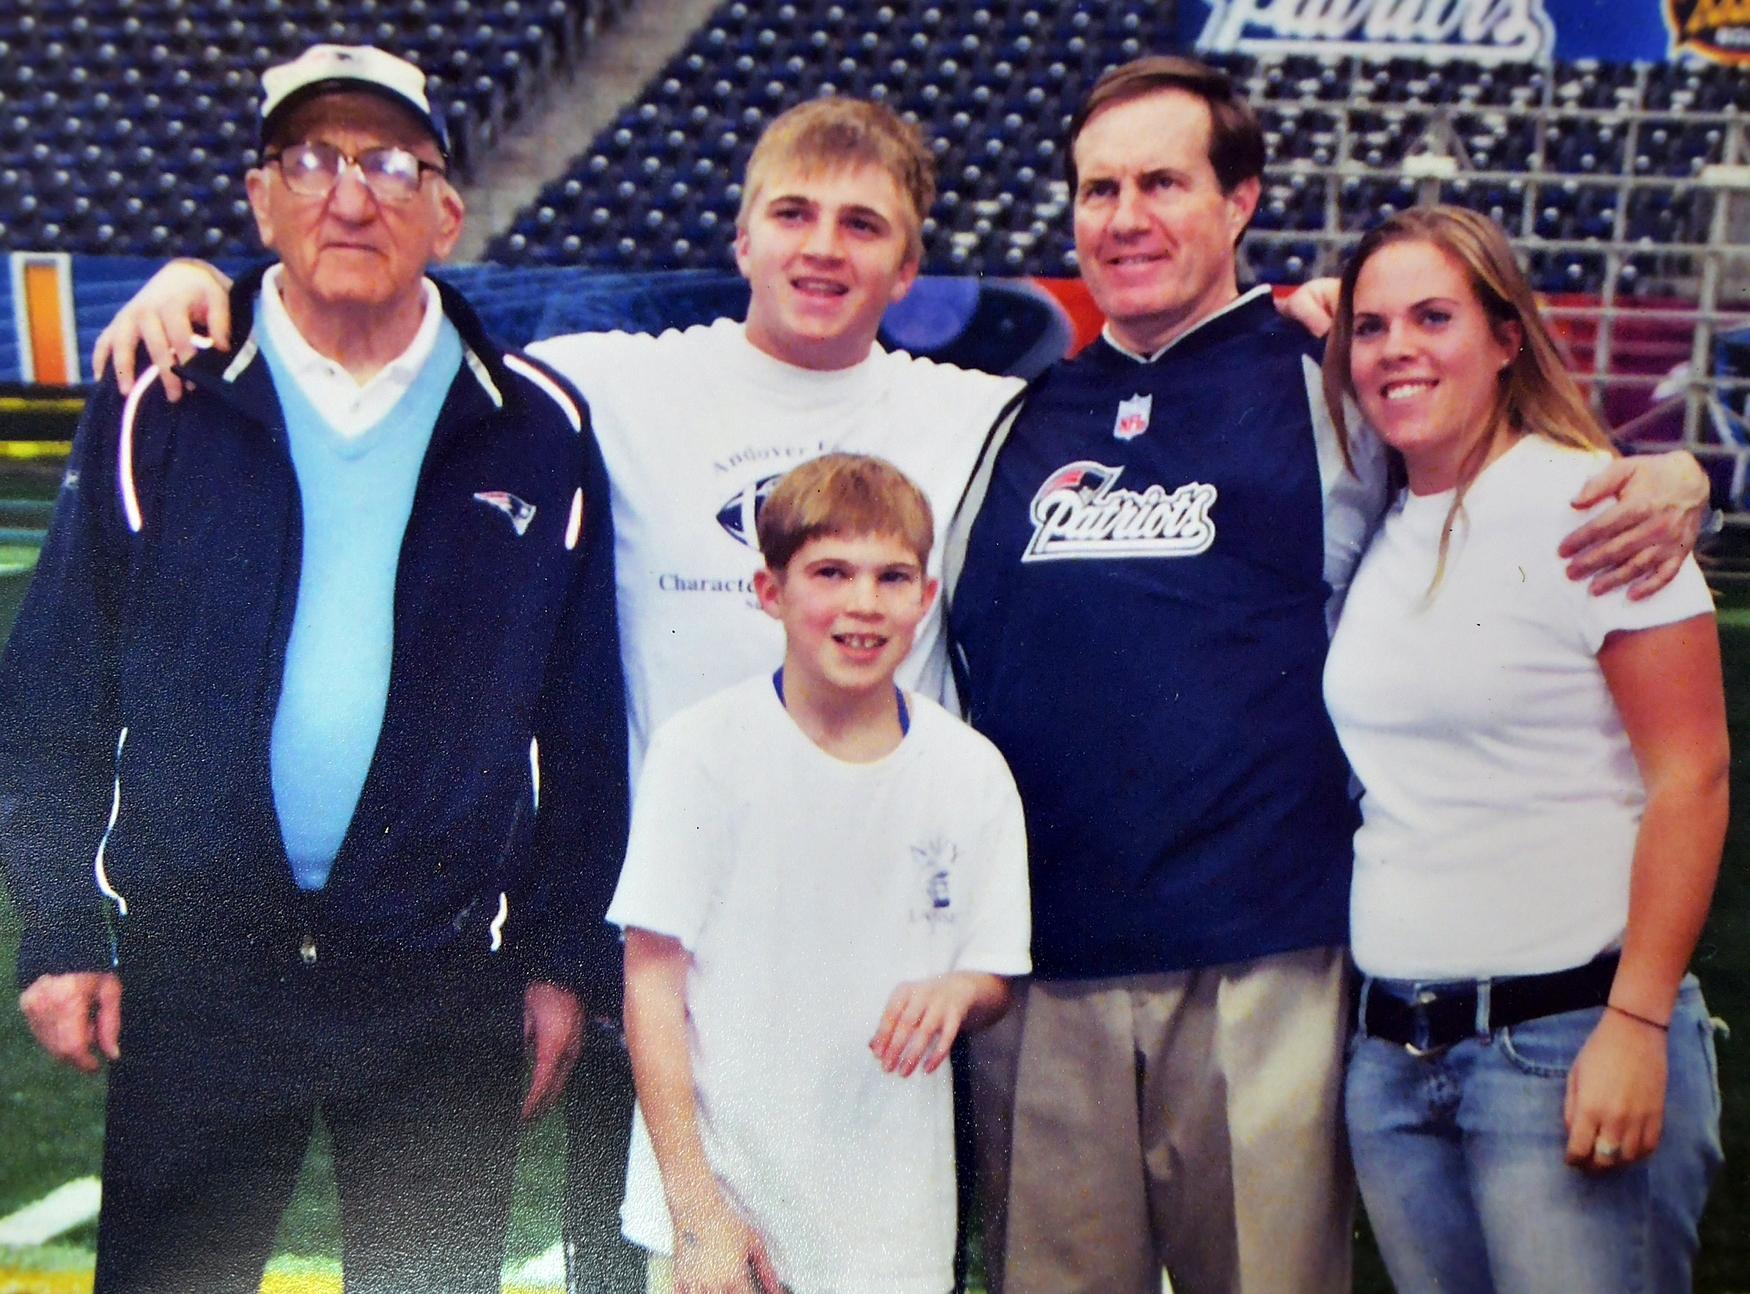 Amanda with her father Bill Belichick and other family members.